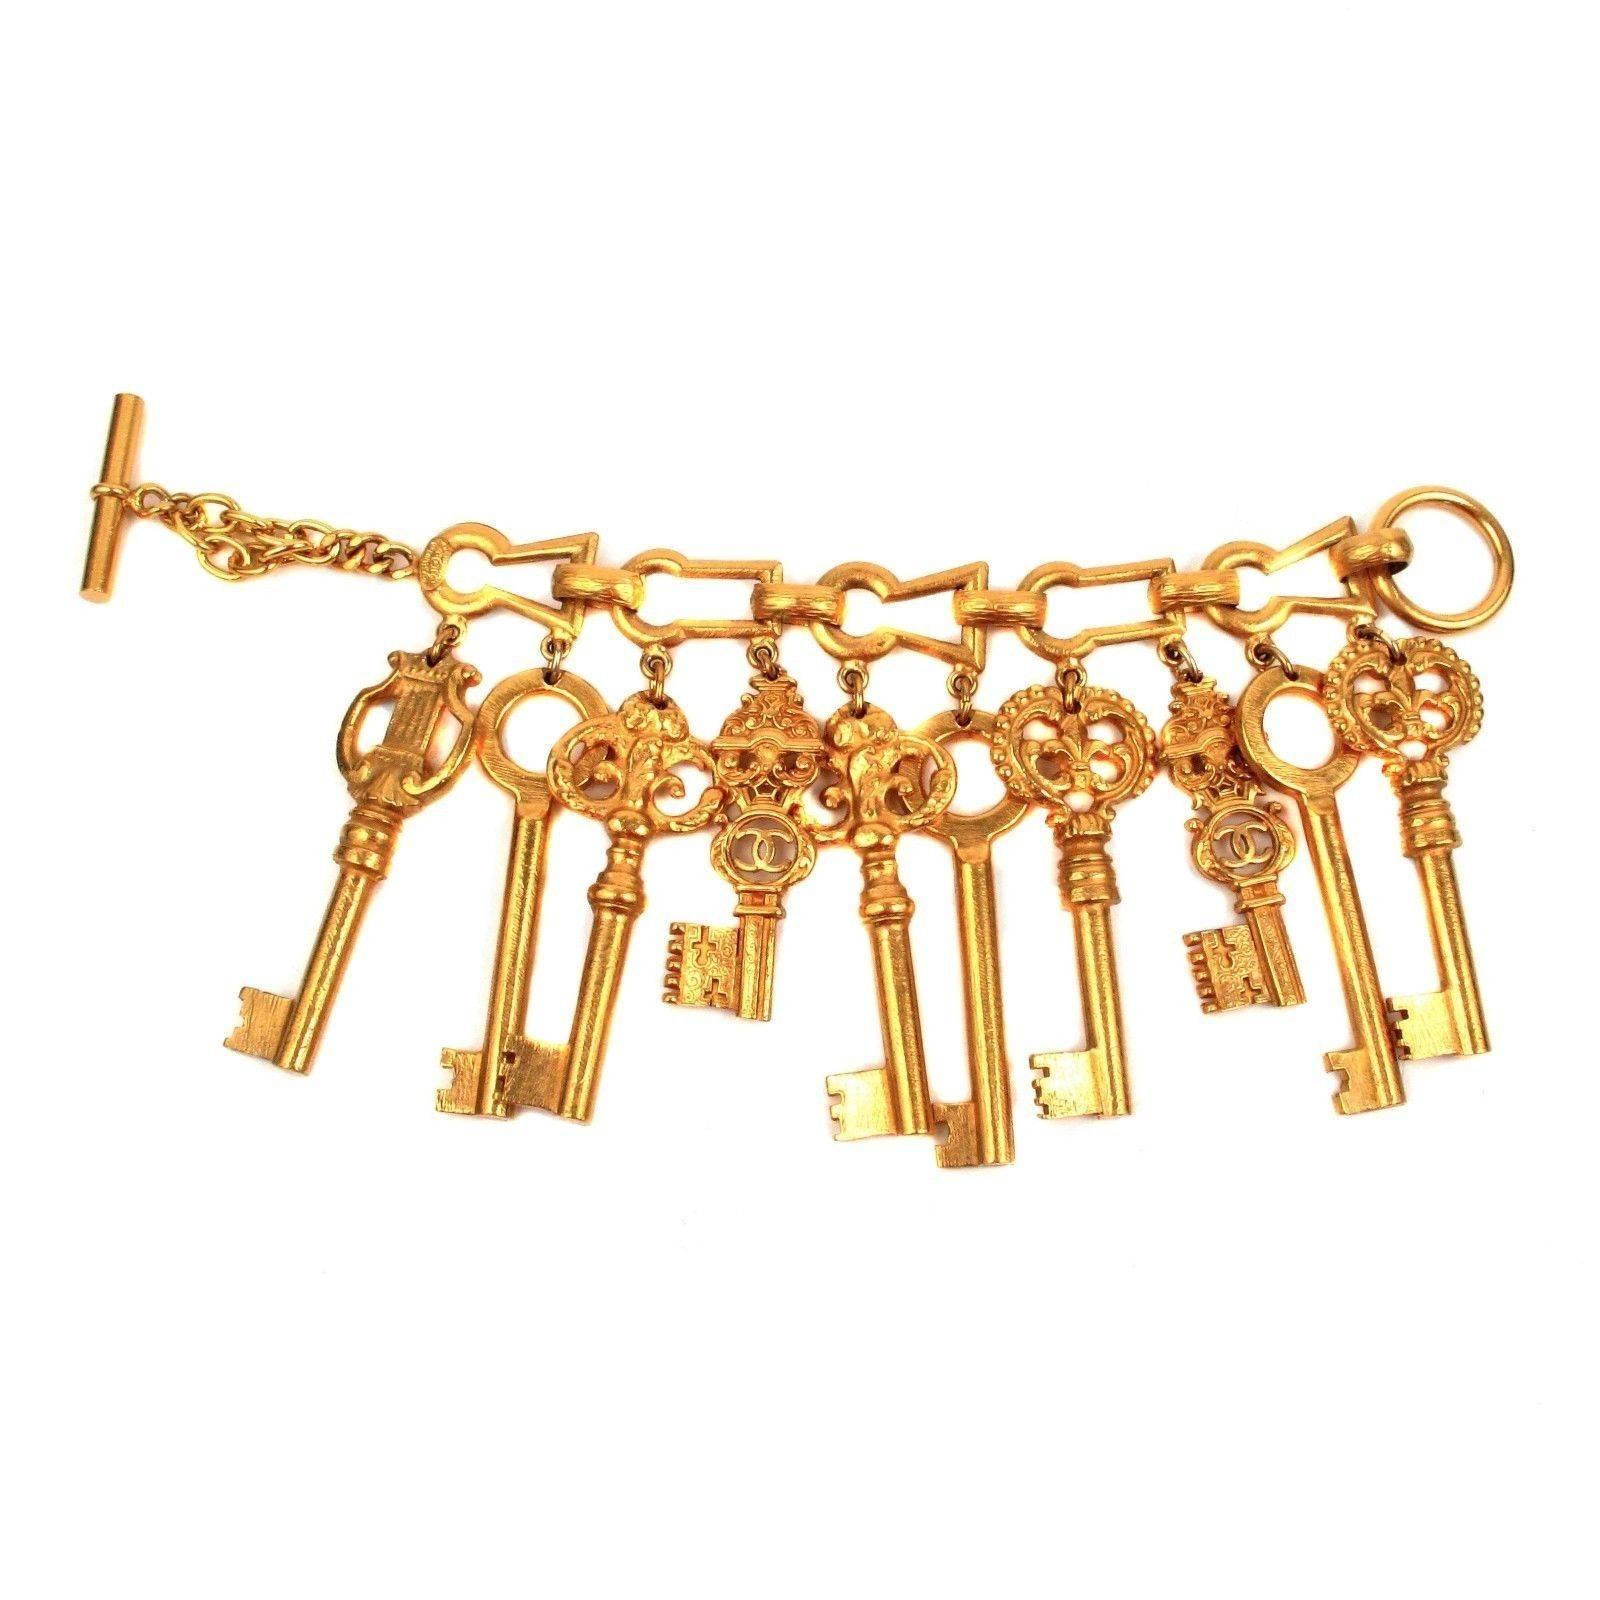 Chanel - Skeleton Key Bracelet

This is one of the most rare collectors items of ALL TIME!

Color: Gold

Material: Metal 

------------------------------------------------------------

Details:

- 10 detailed skeleton key charms

-